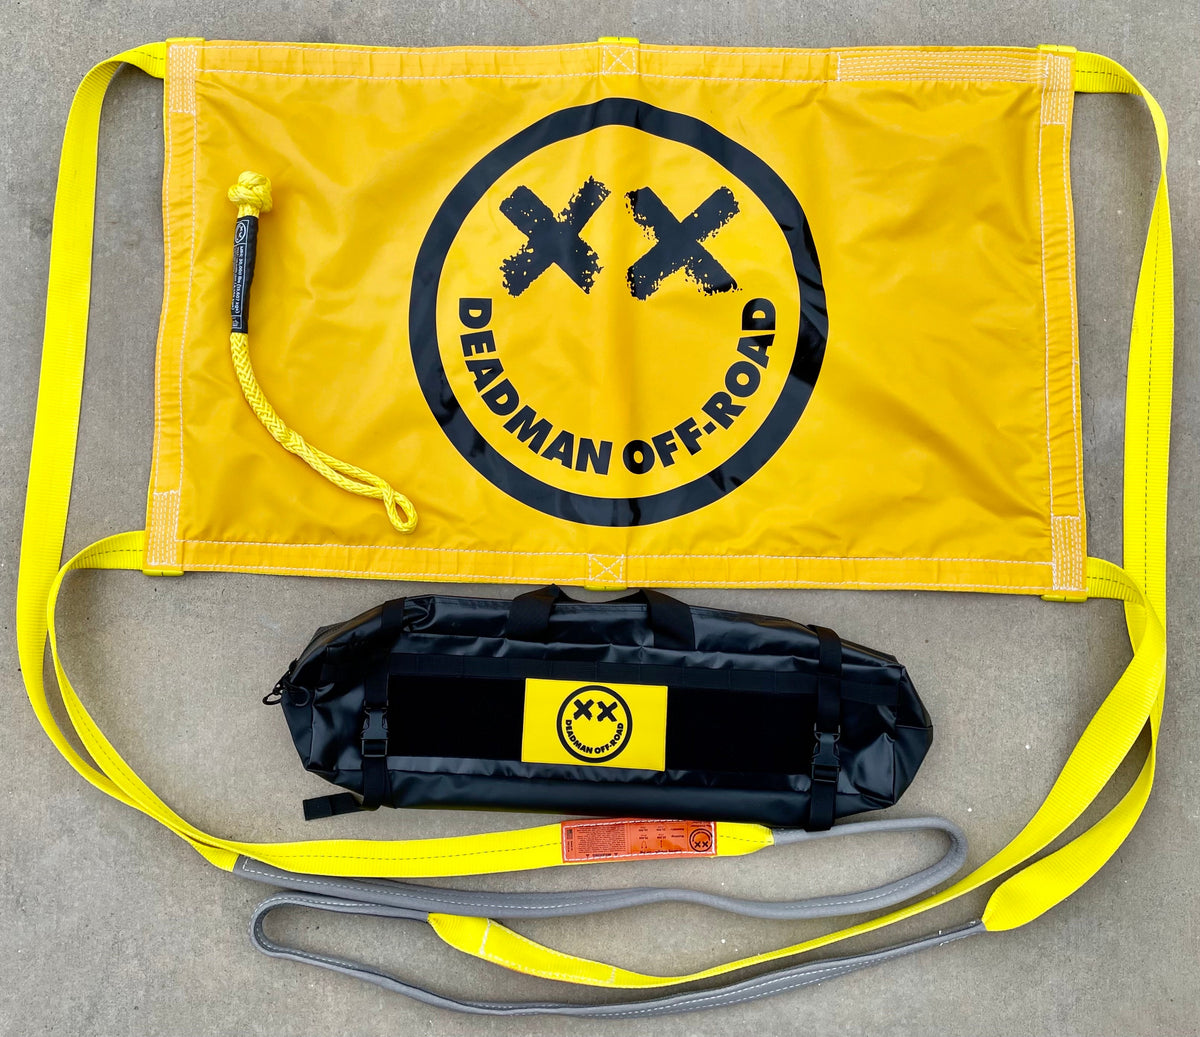 The Complete Deadman Kit V2  Recovery Gear, Camping Gear Deadman Off-Road- Overland Kitted